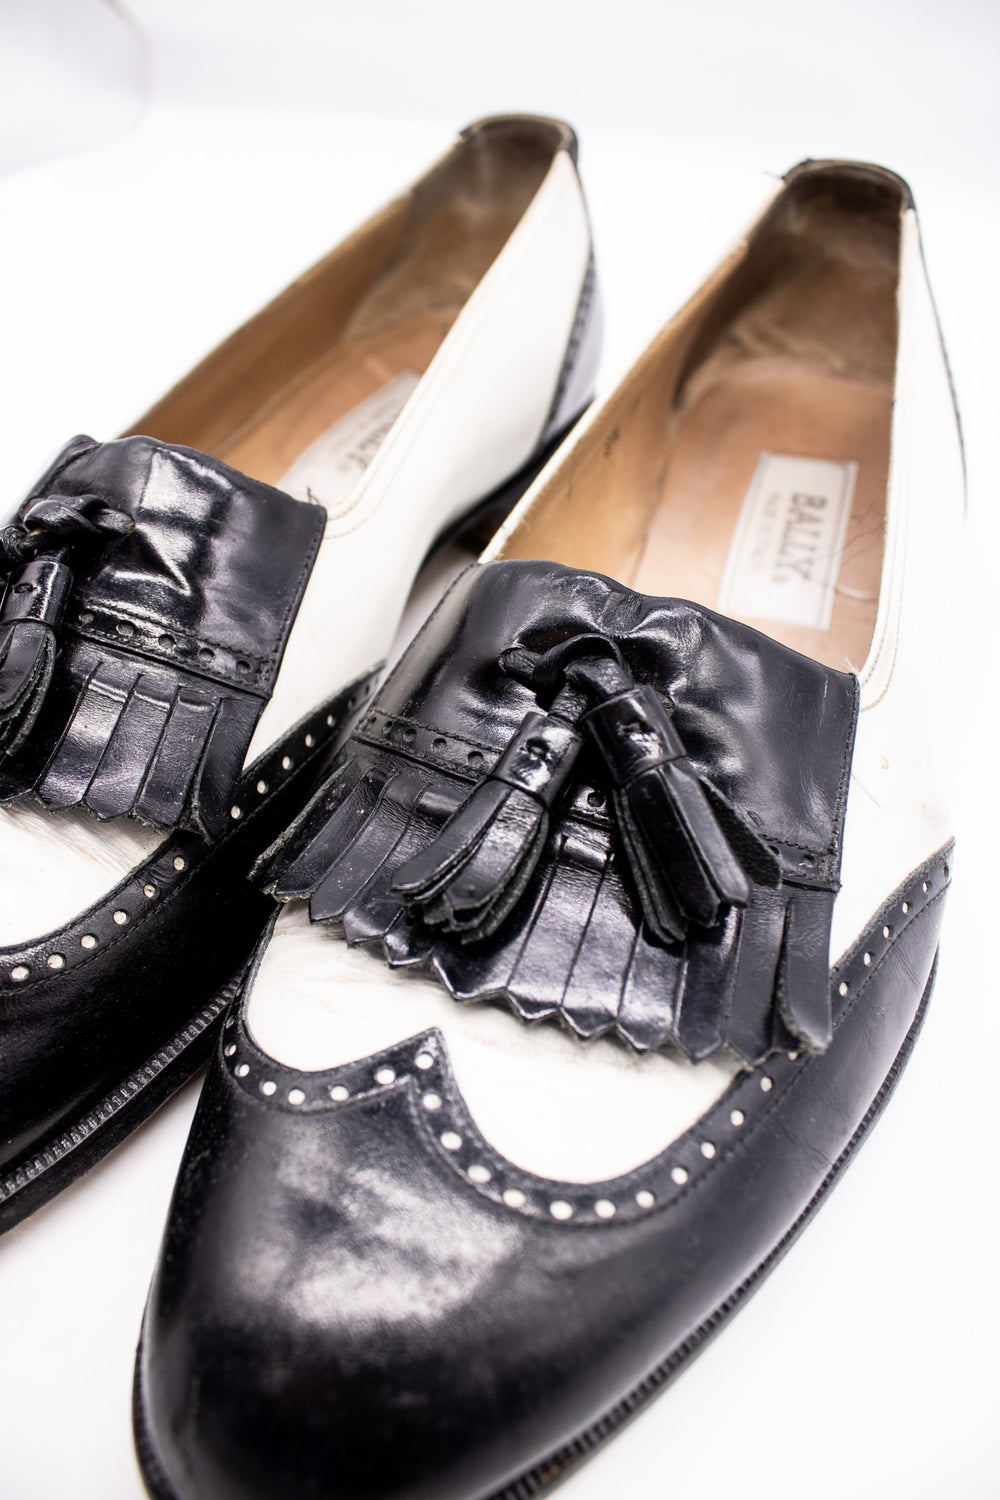 Bally : Black & White Leather Oxford Loafer w/ Tassels